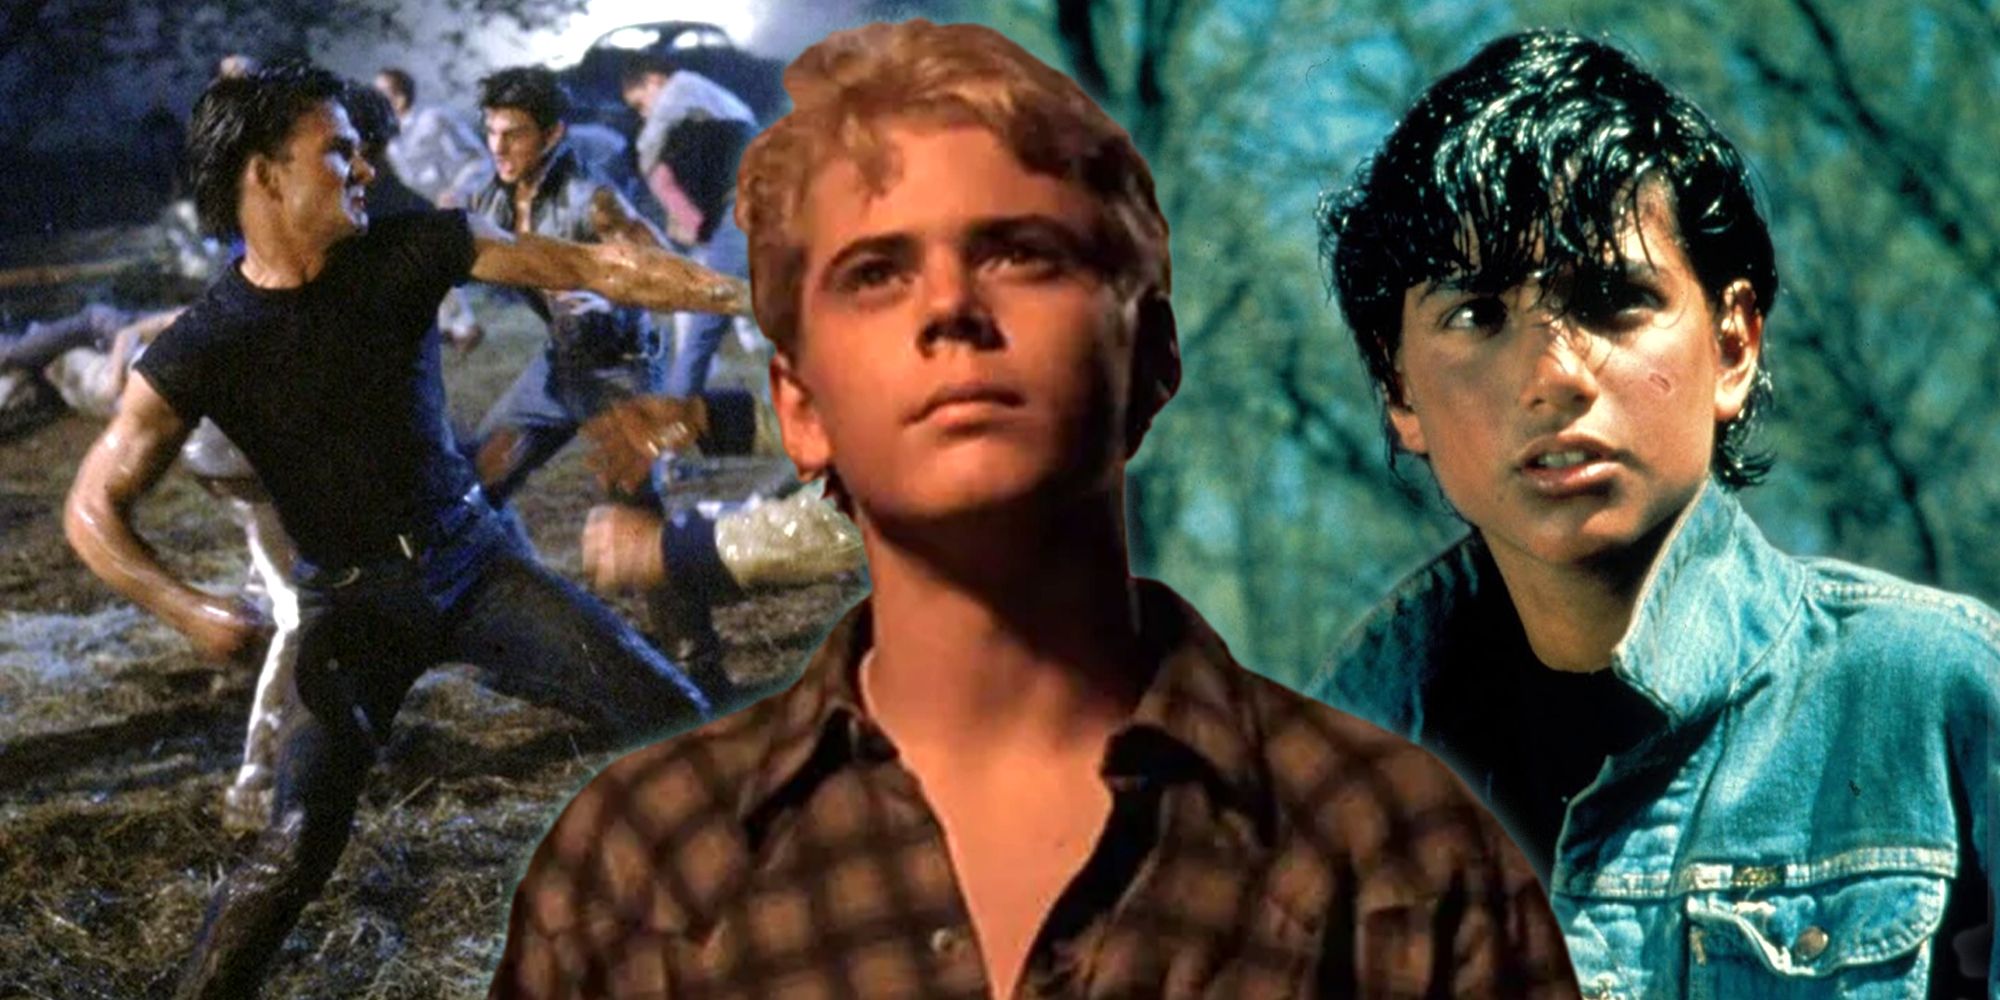 What Rob Lowe Said About Working With Tom Cruise On The Outsiders